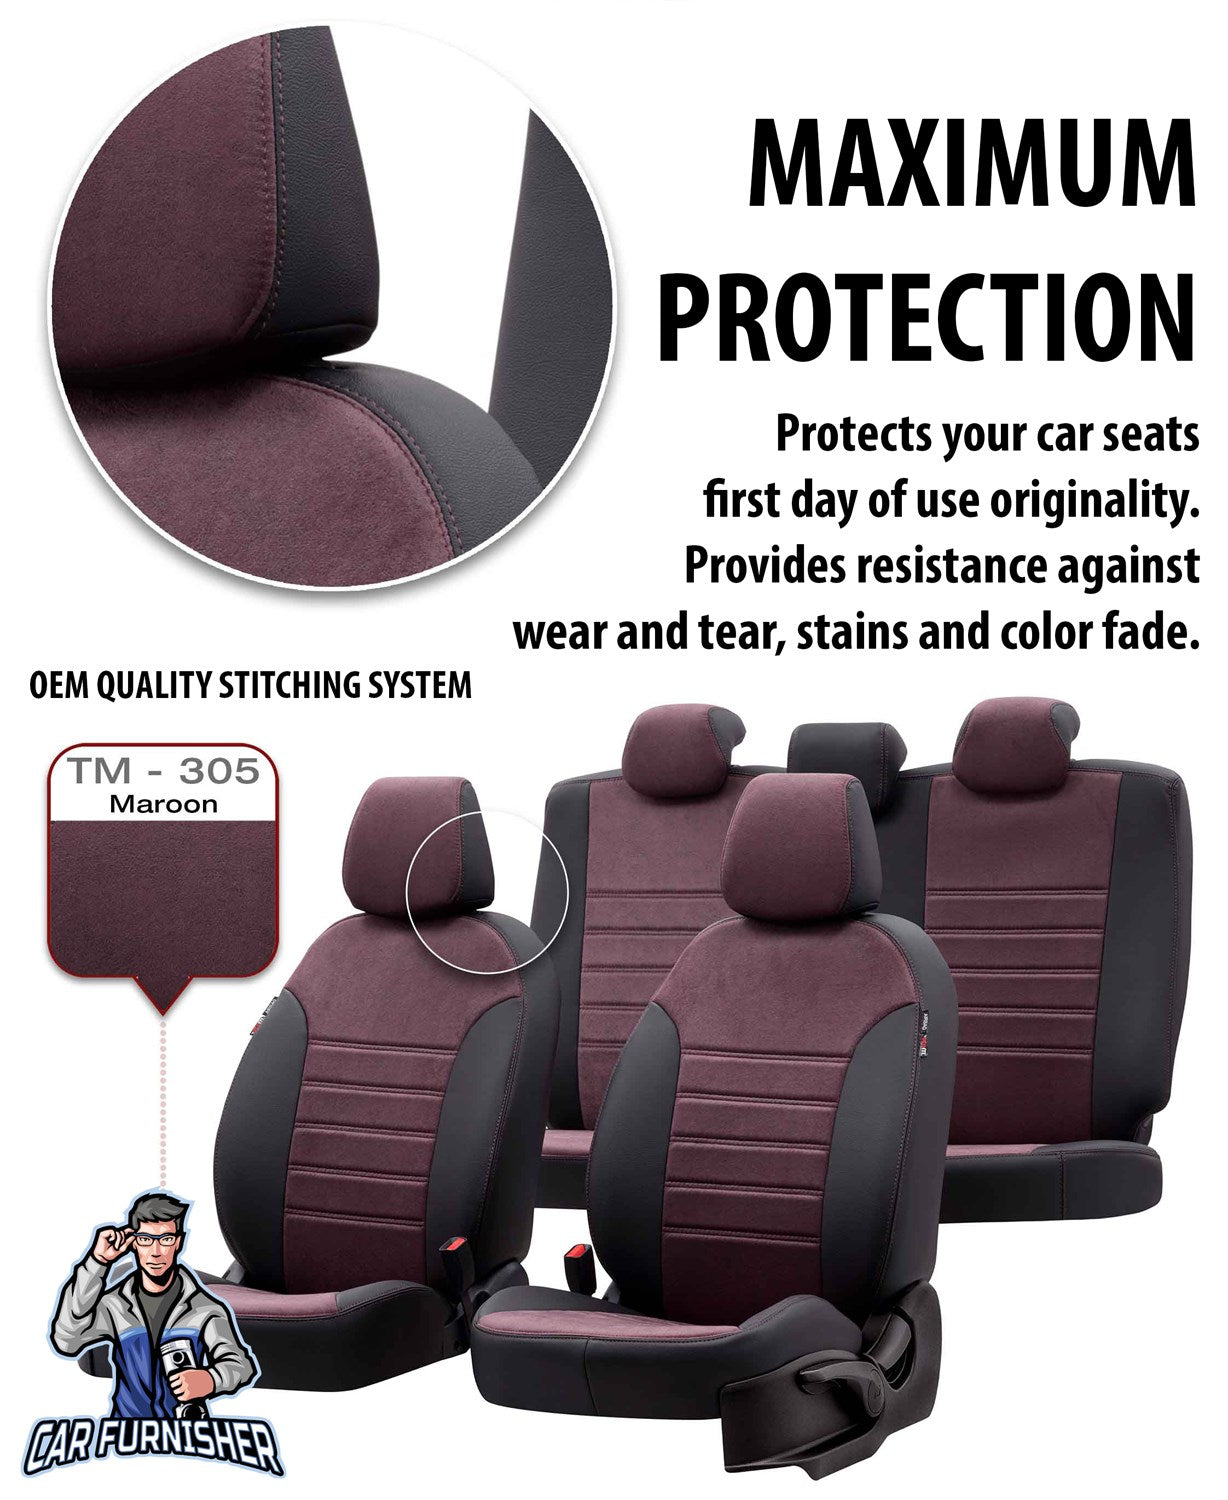 Seat Leon Seat Covers Milano Suede Design Burgundy Leather & Suede Fabric